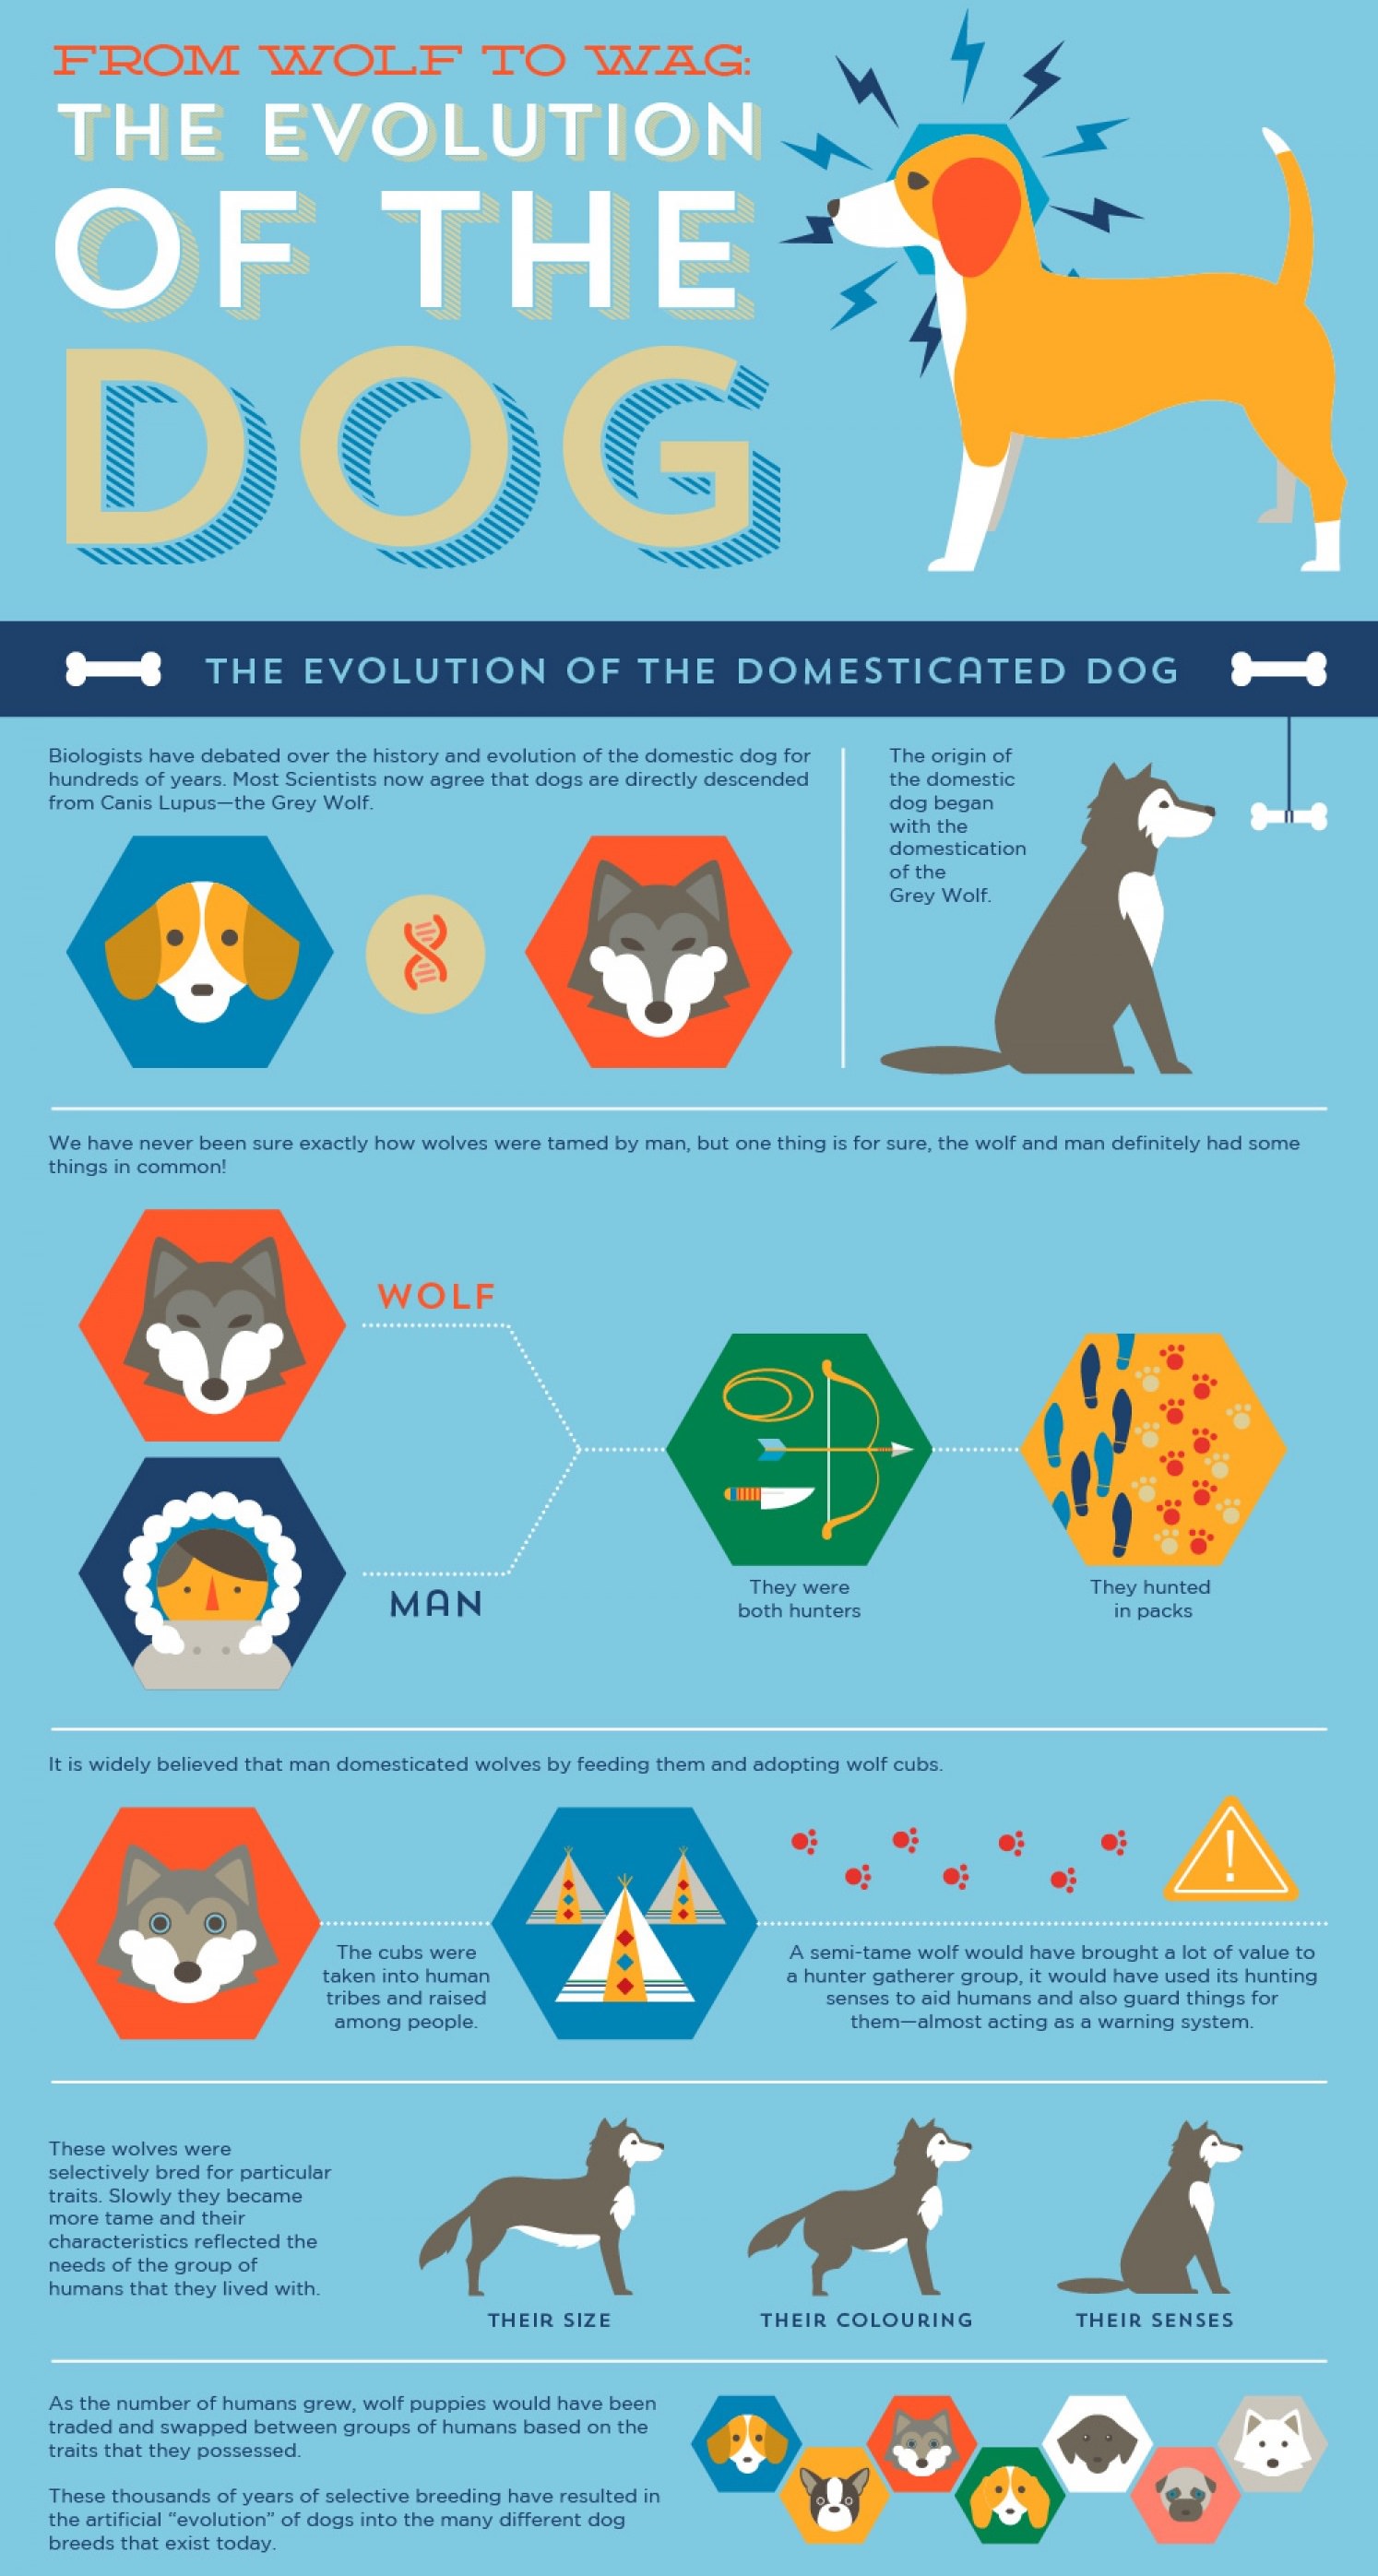 how long ago did dogs evolve from wolves